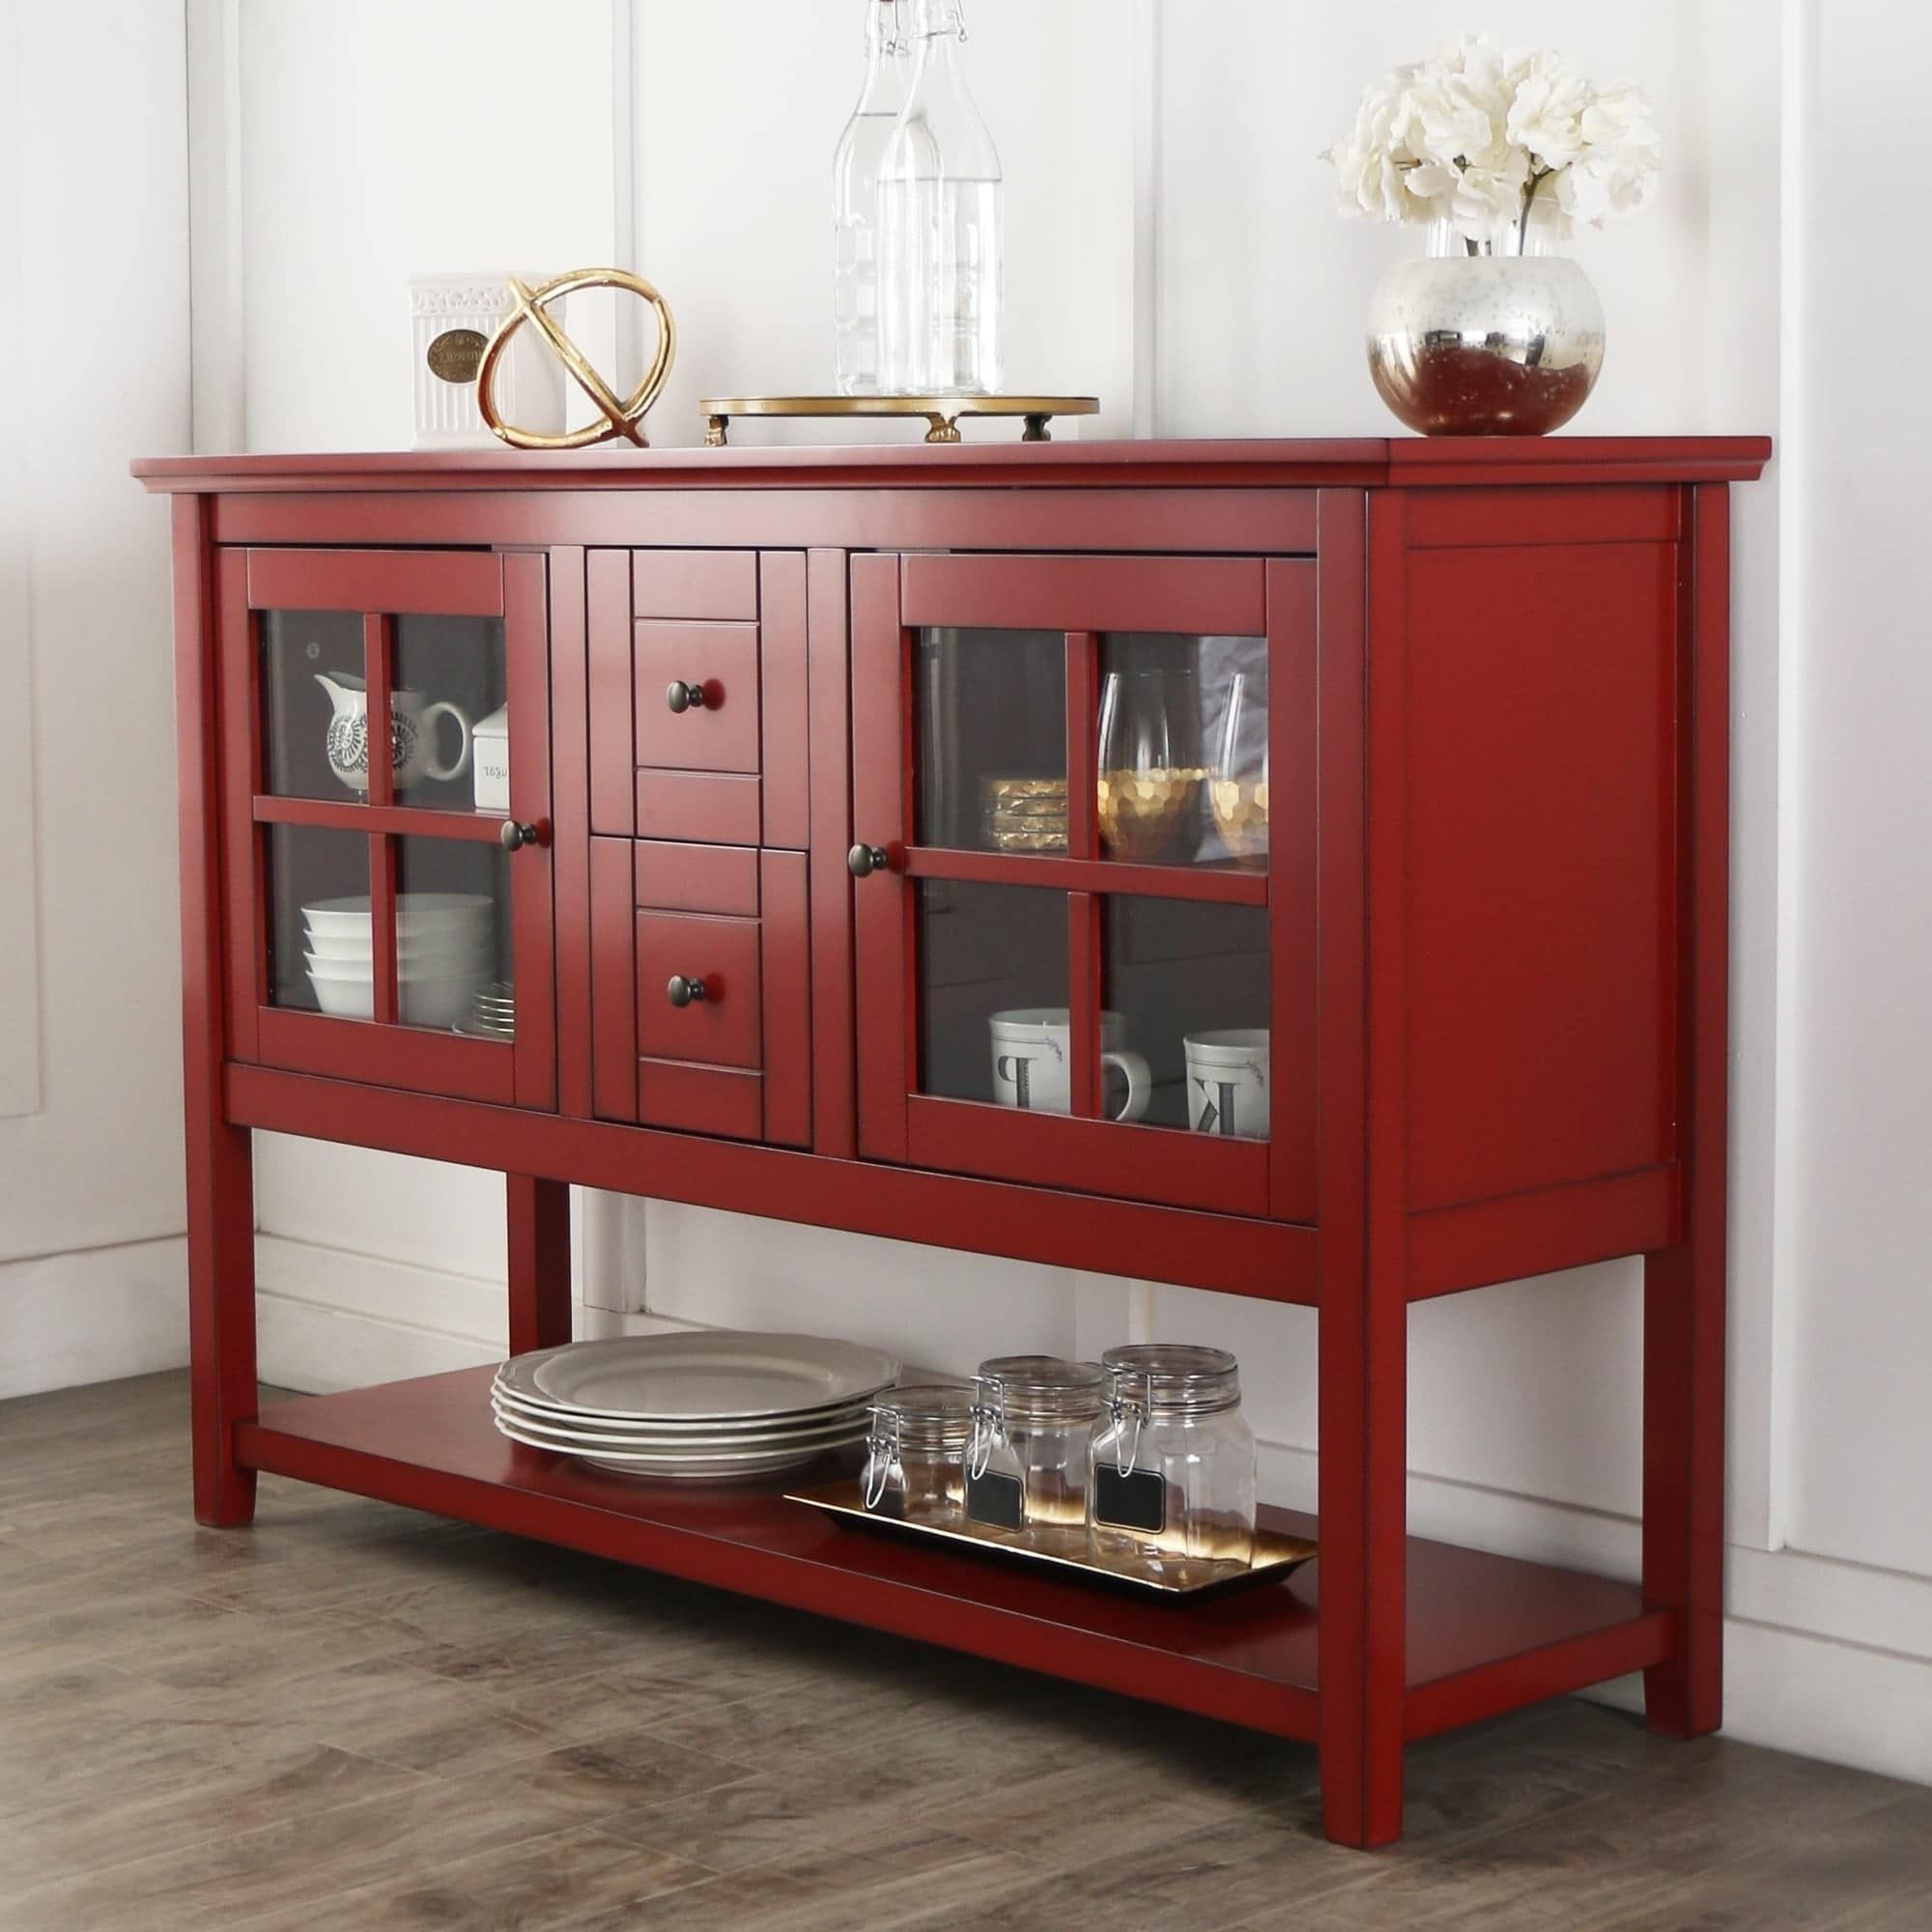 52" Buffet Tv Stand In Antique Red In 2019 | Naples With Regard To Simple Living Red Montego Buffets (View 18 of 20)